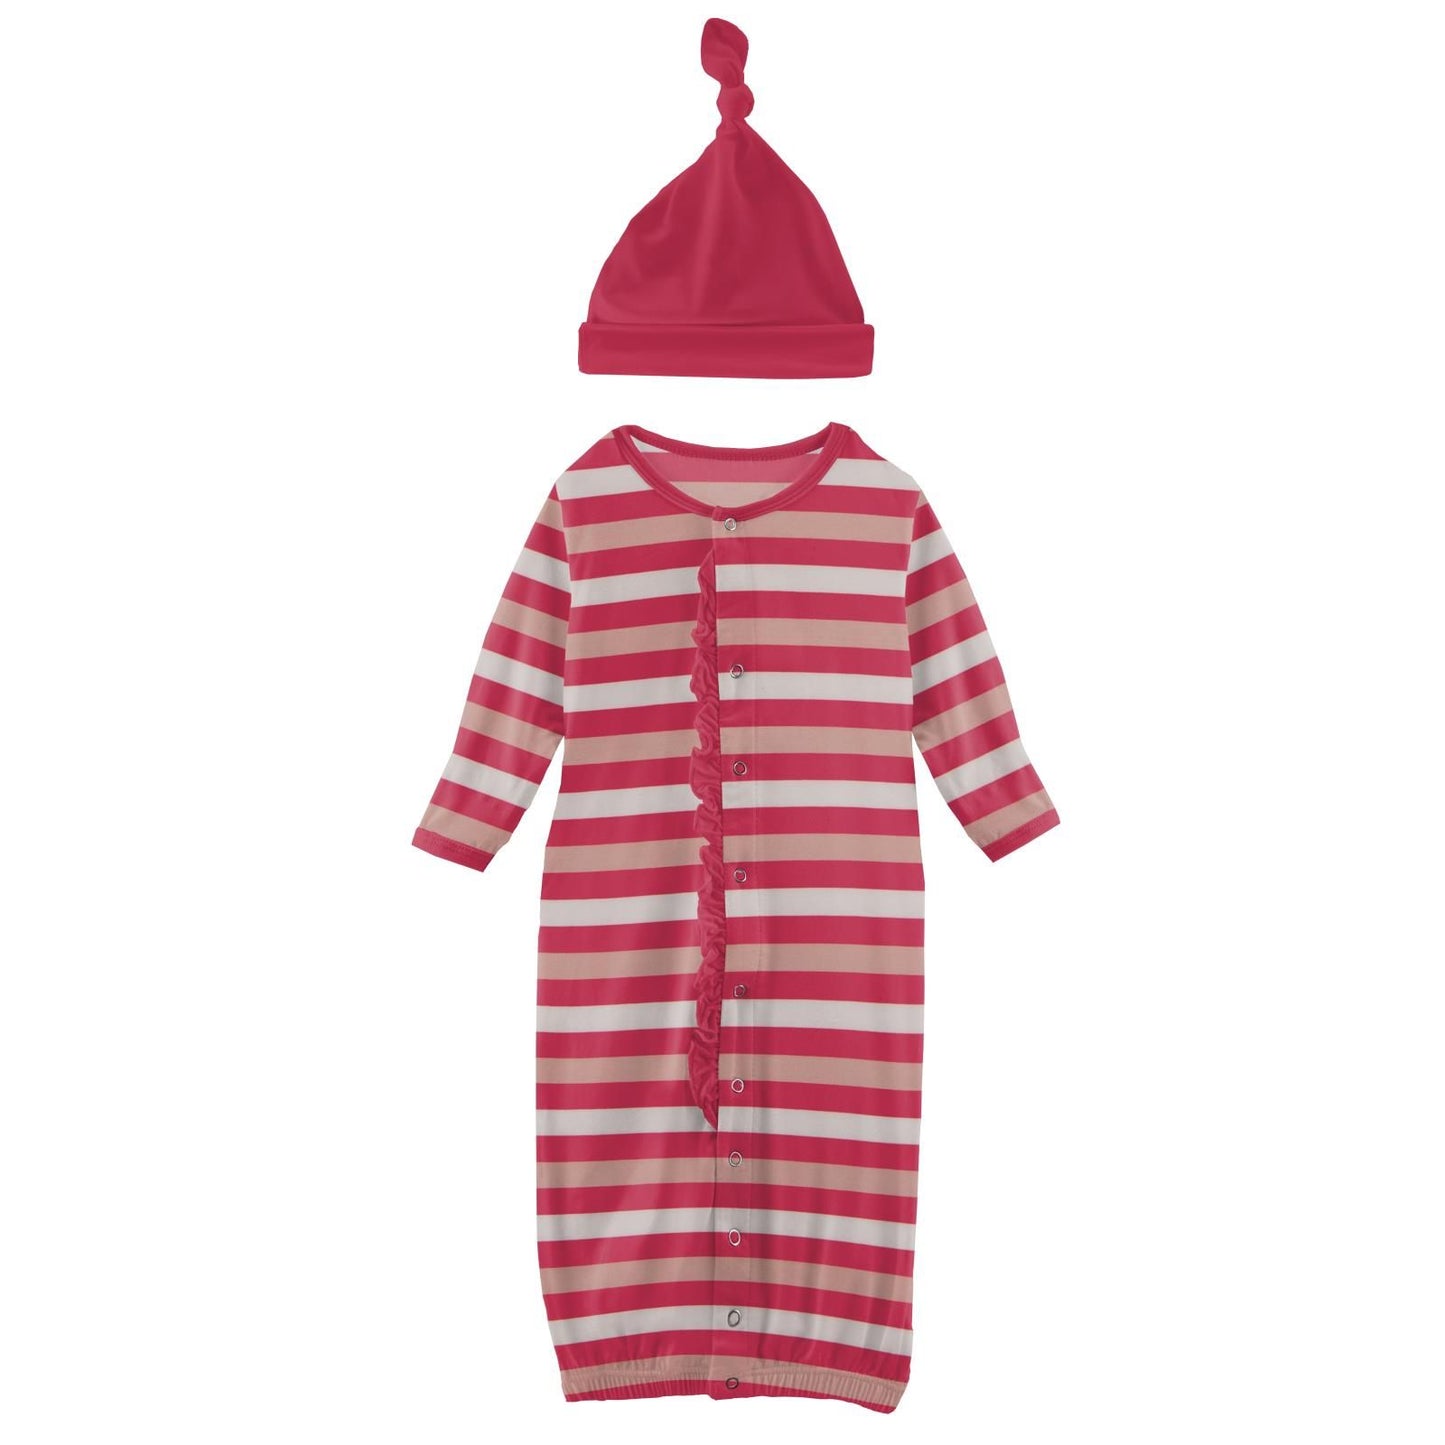 Last One - Size Newborn: Converter Gown with Ruffles and Hat - Hopscotch Stripe